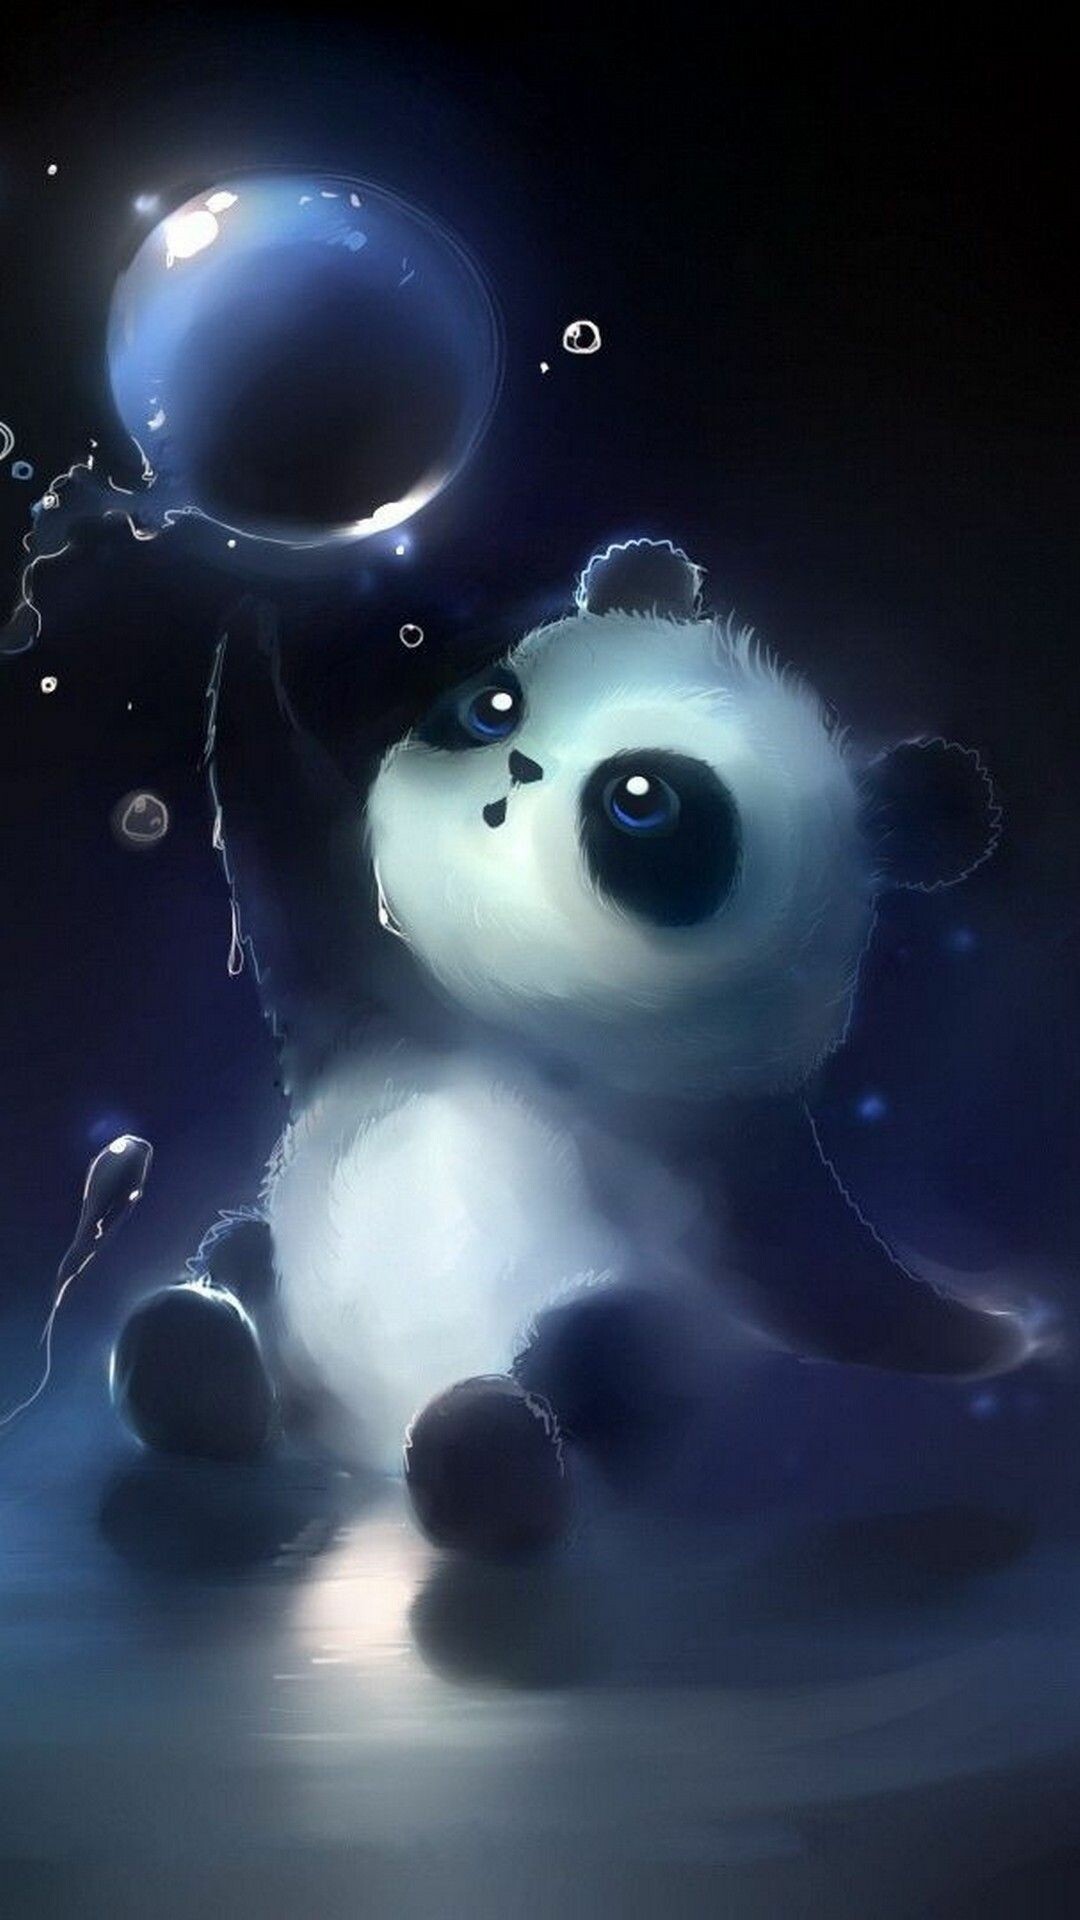 Panda: Known as one of the most adorable animals in the world for its round face, large dark circles around its eyes, chubby body. 1080x1920 Full HD Background.